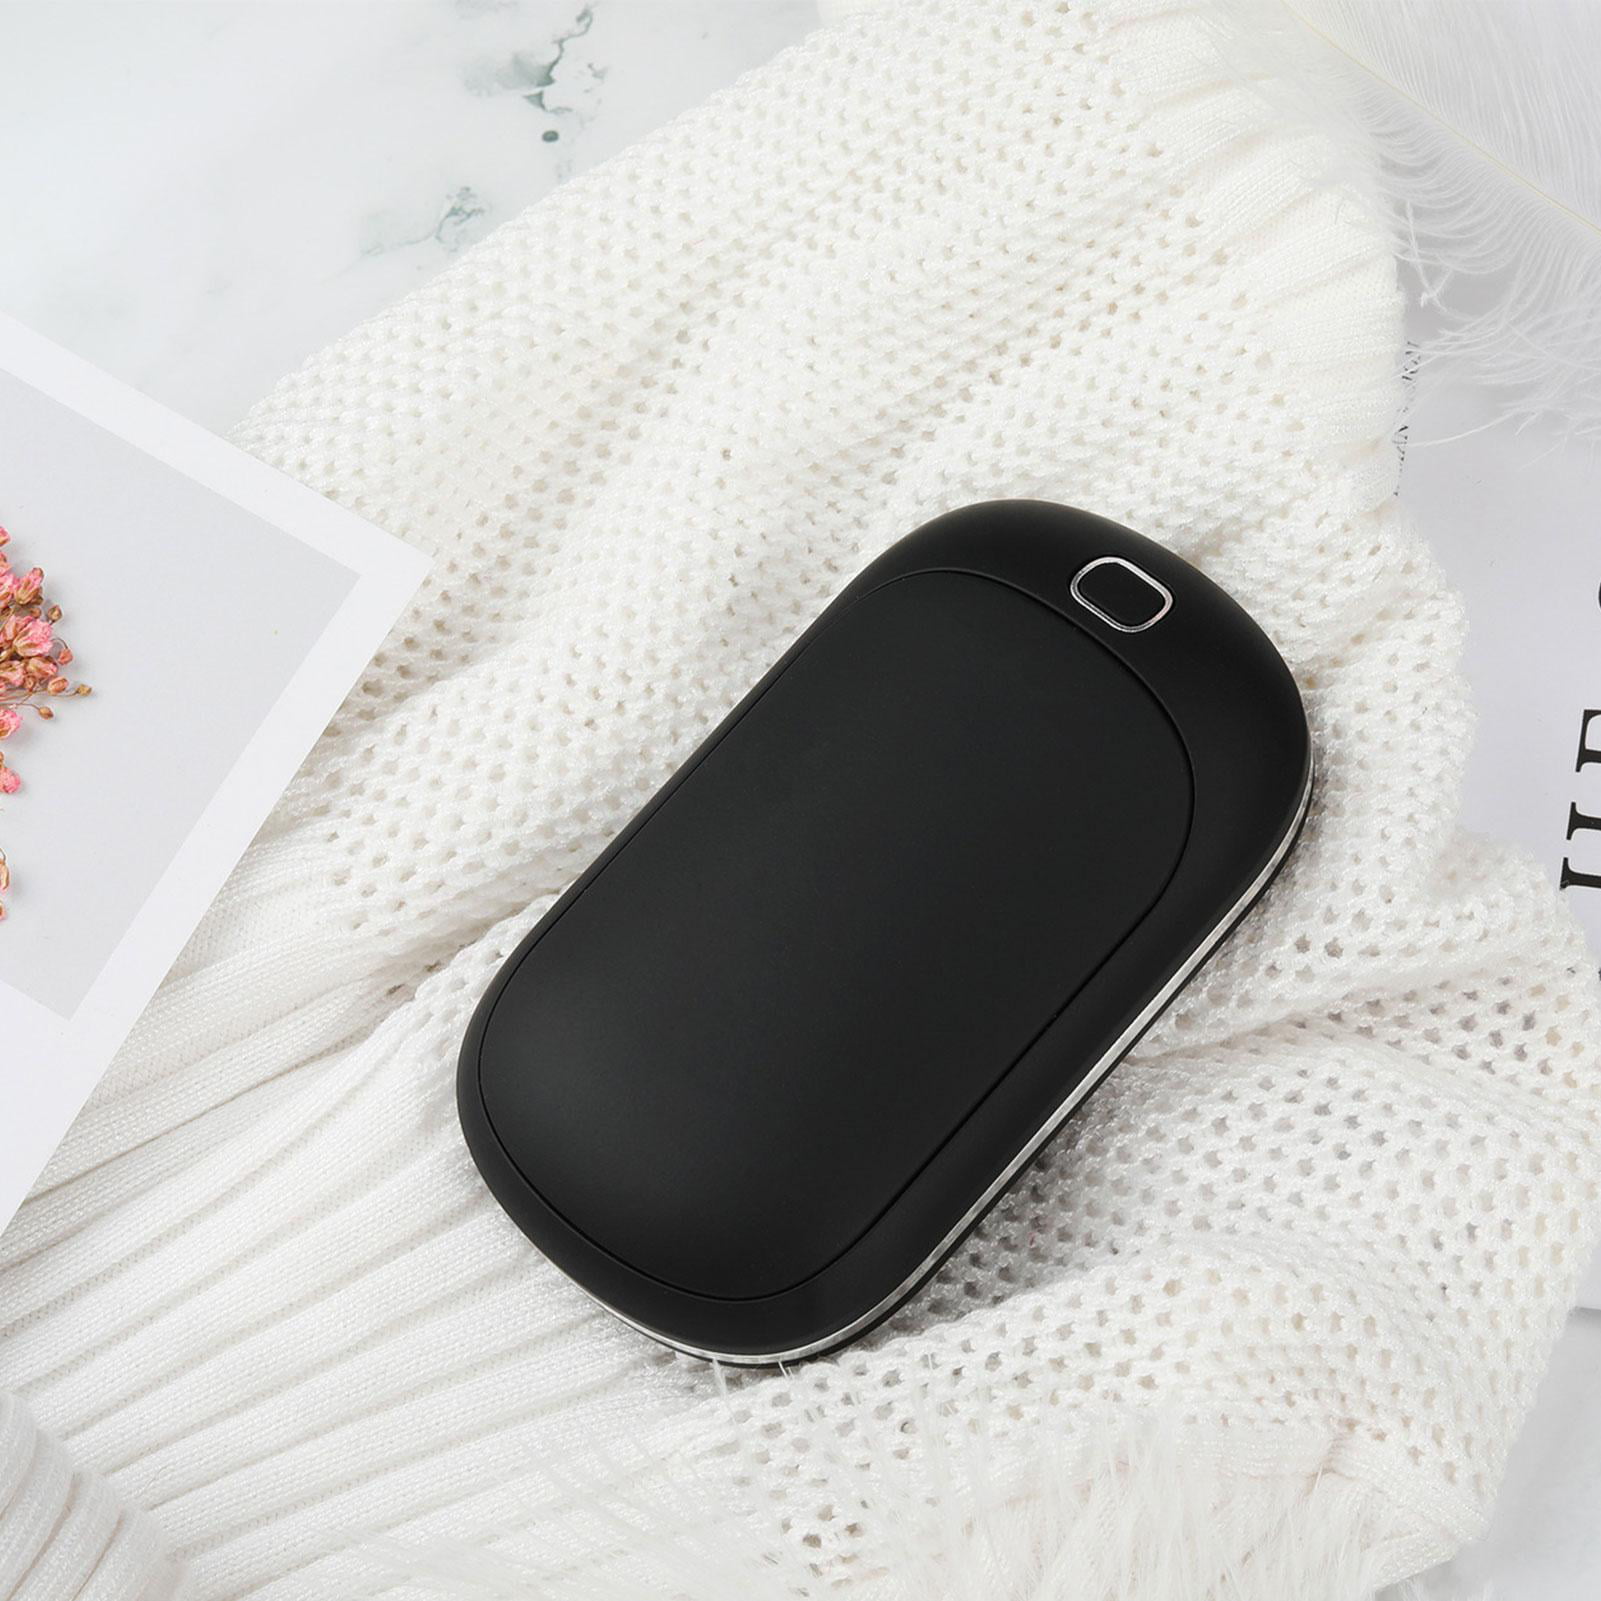 Details about   Hand Warmers 5200mAh Double-Side Heating Portable USB Charger gift for Winter 